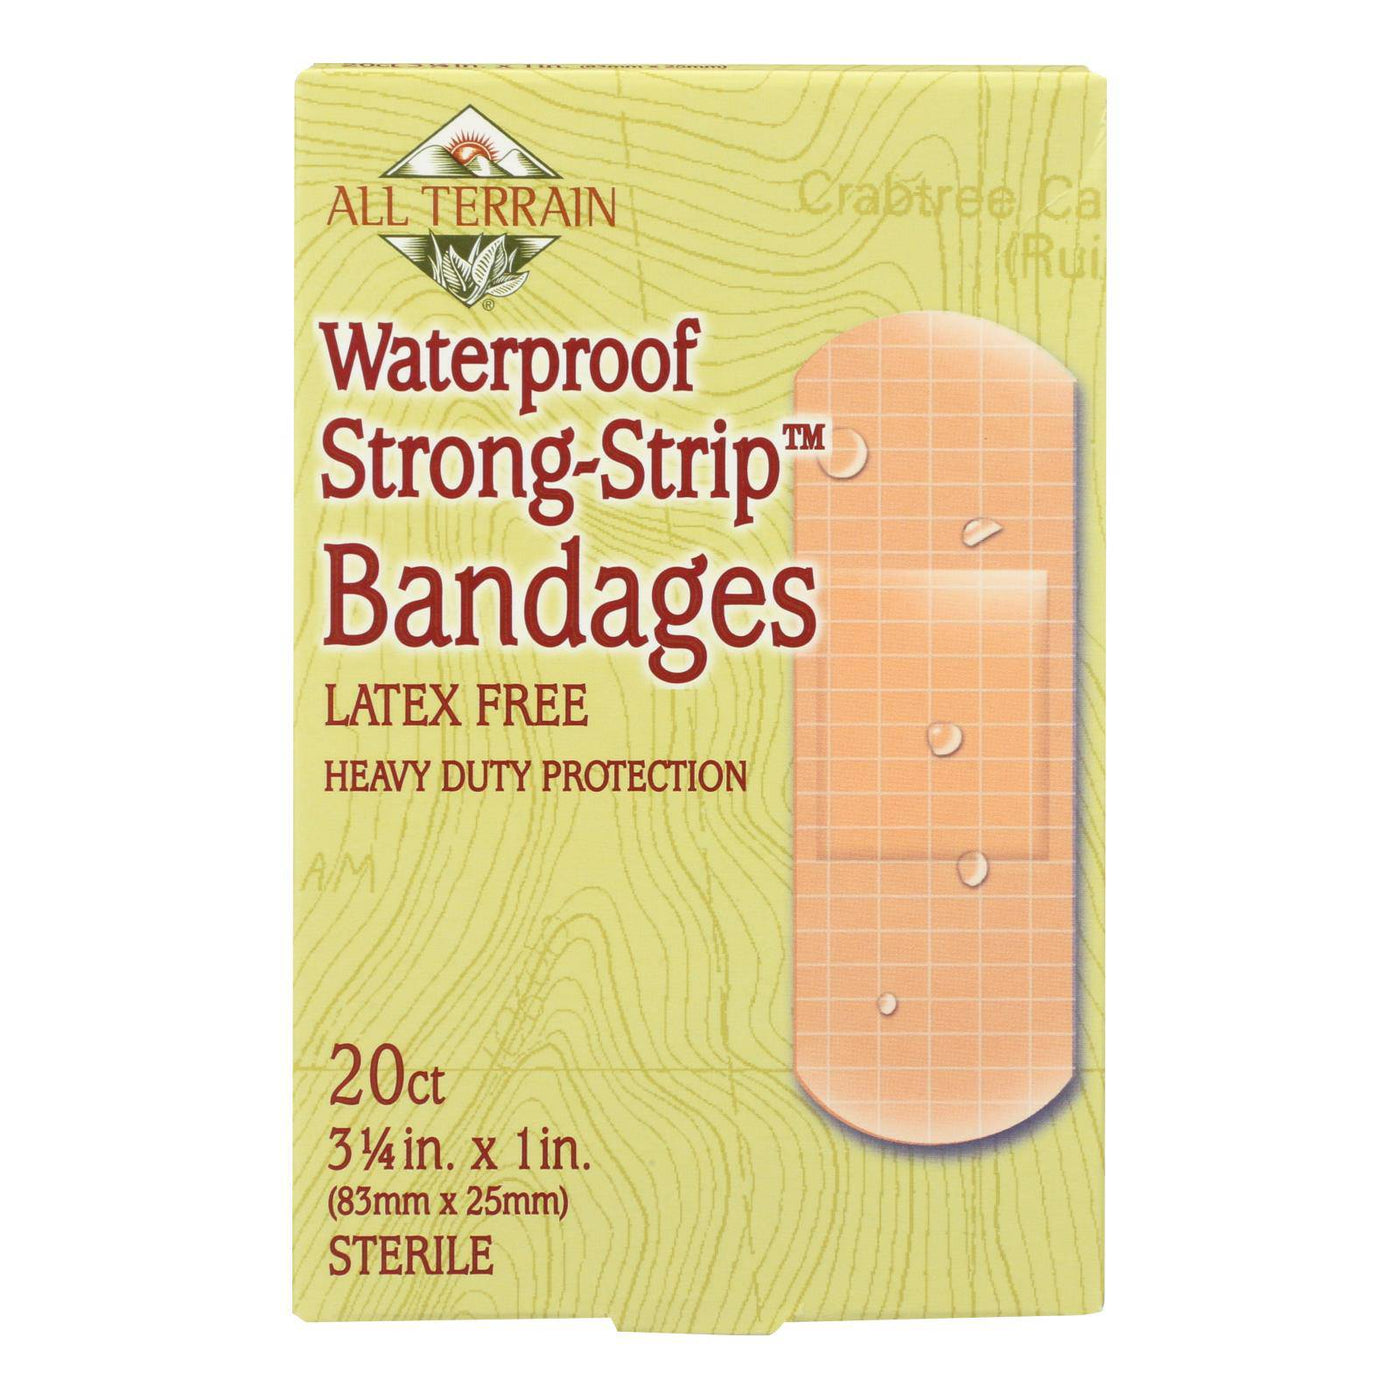 All Terrain - Bandages - Waterproof Strong Strip 1 Inch - 20 Count | OnlyNaturals.us